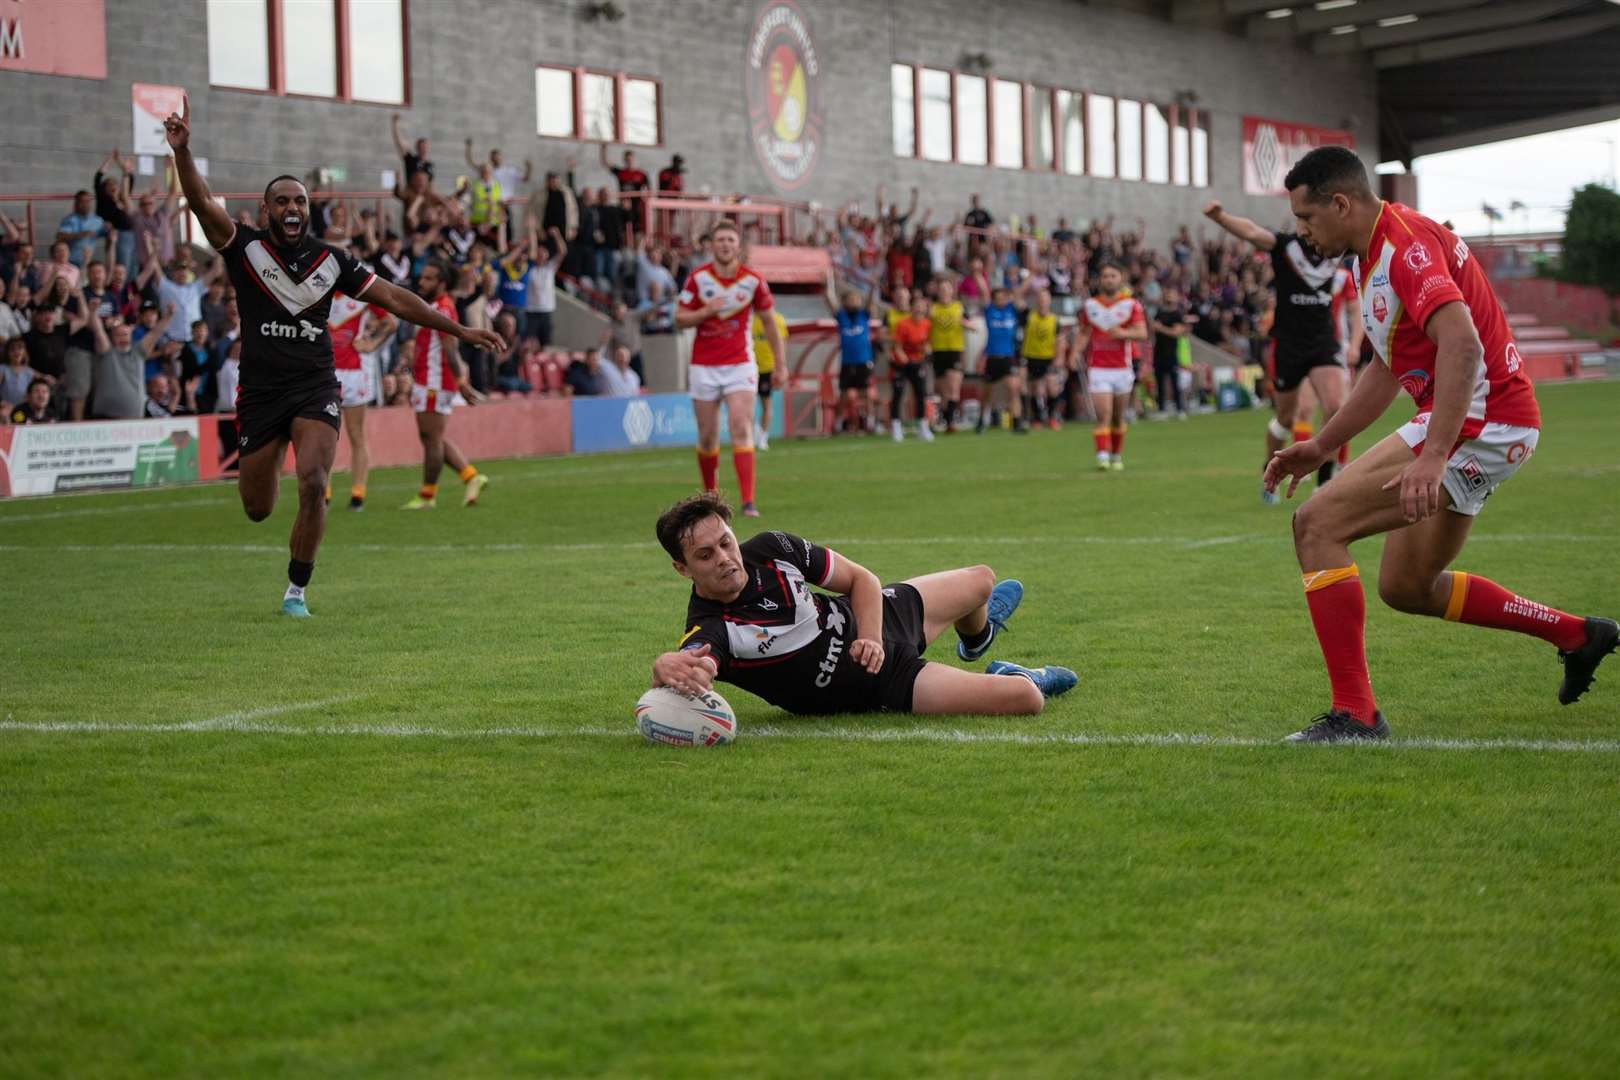 London Broncos versus the Sheffield Eagles at Ebbsfleet United's home ground Picture: Alan Stanford